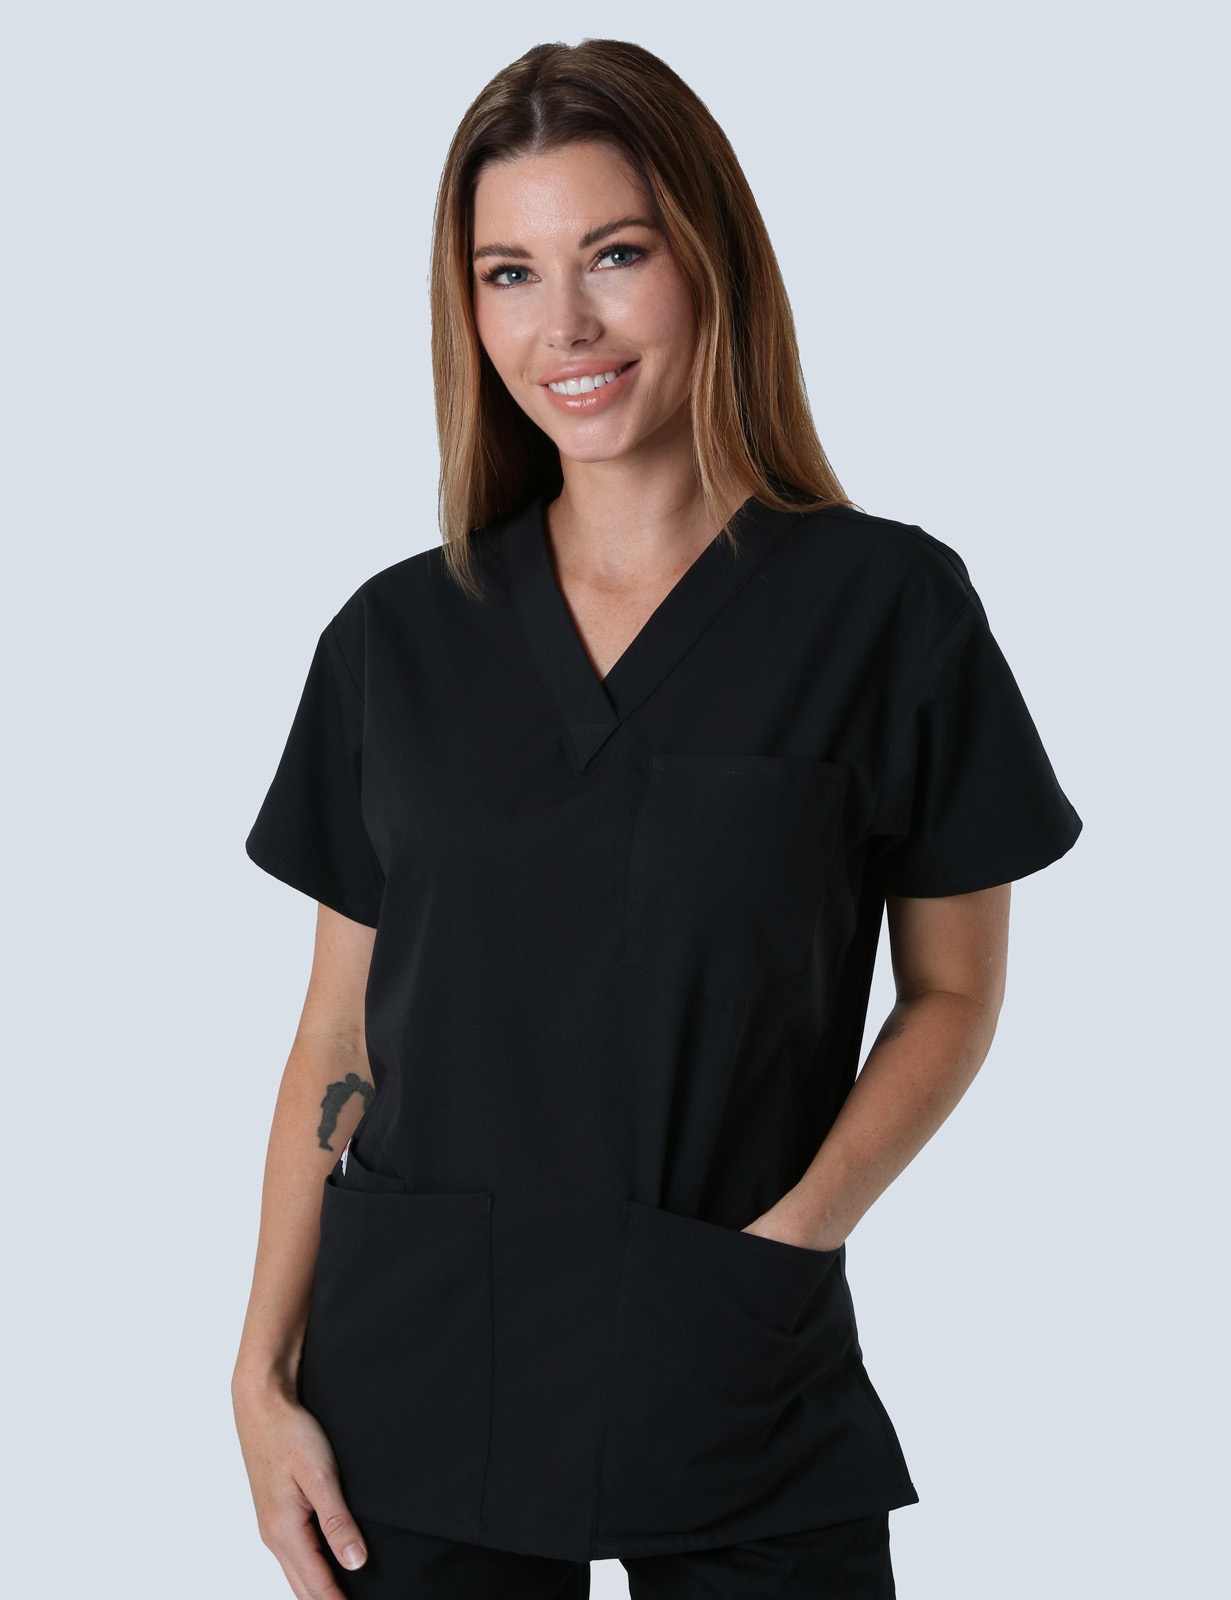 Northpark Private ED Doctor (4 Pocket Scrub Top and Regular Pants in Black incl Logos)